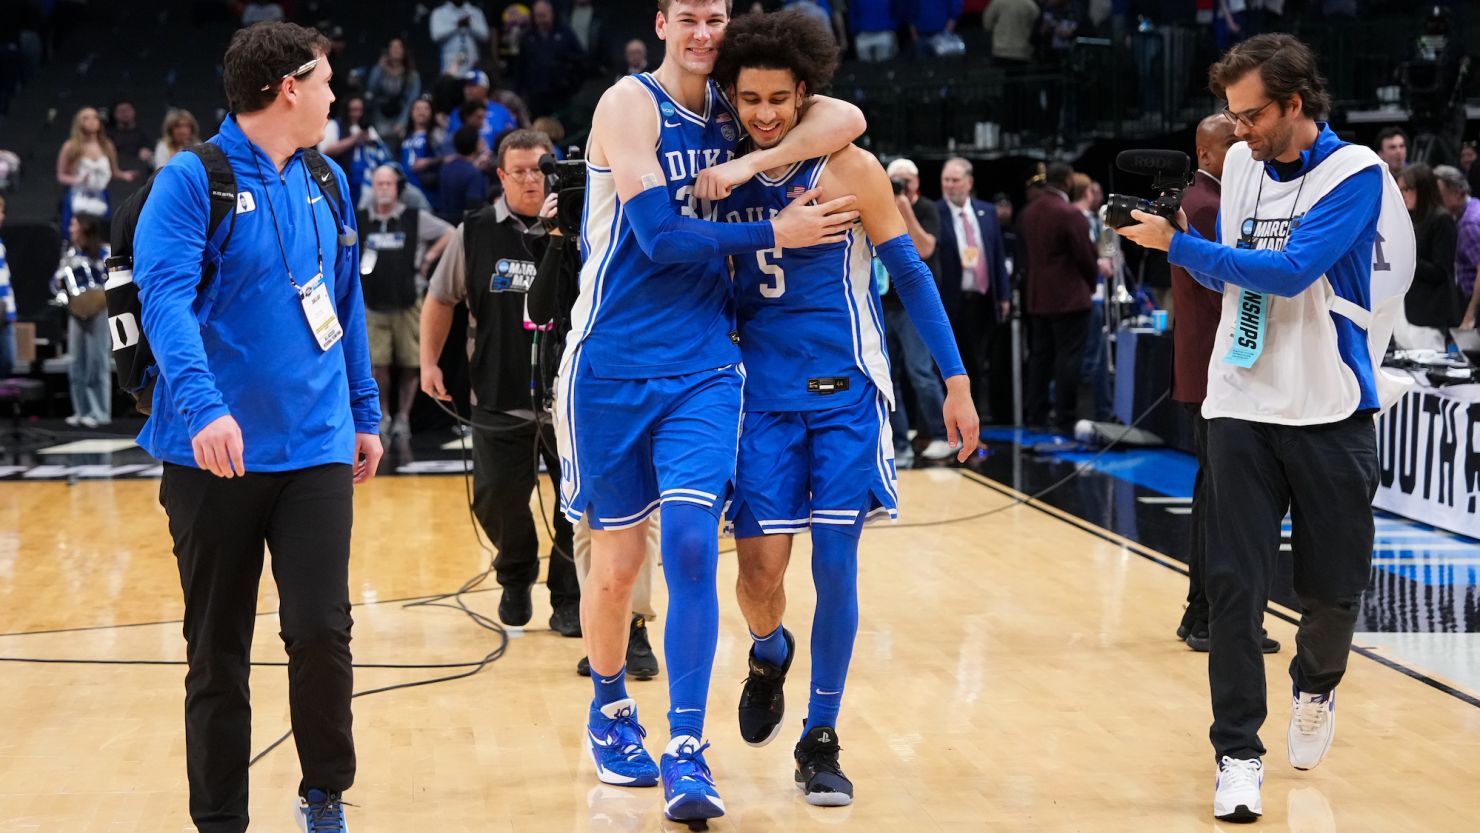 Kyle Filipowski #30 hugs Tyrese Proctor #5 of the Duke Blue Devils after defeating the Houston Cougars during the Sweet Sixteen round of the 2024 NCAA Men's Basketball Tournament held at American Airlines Center on Friday in Dallas, Texas.